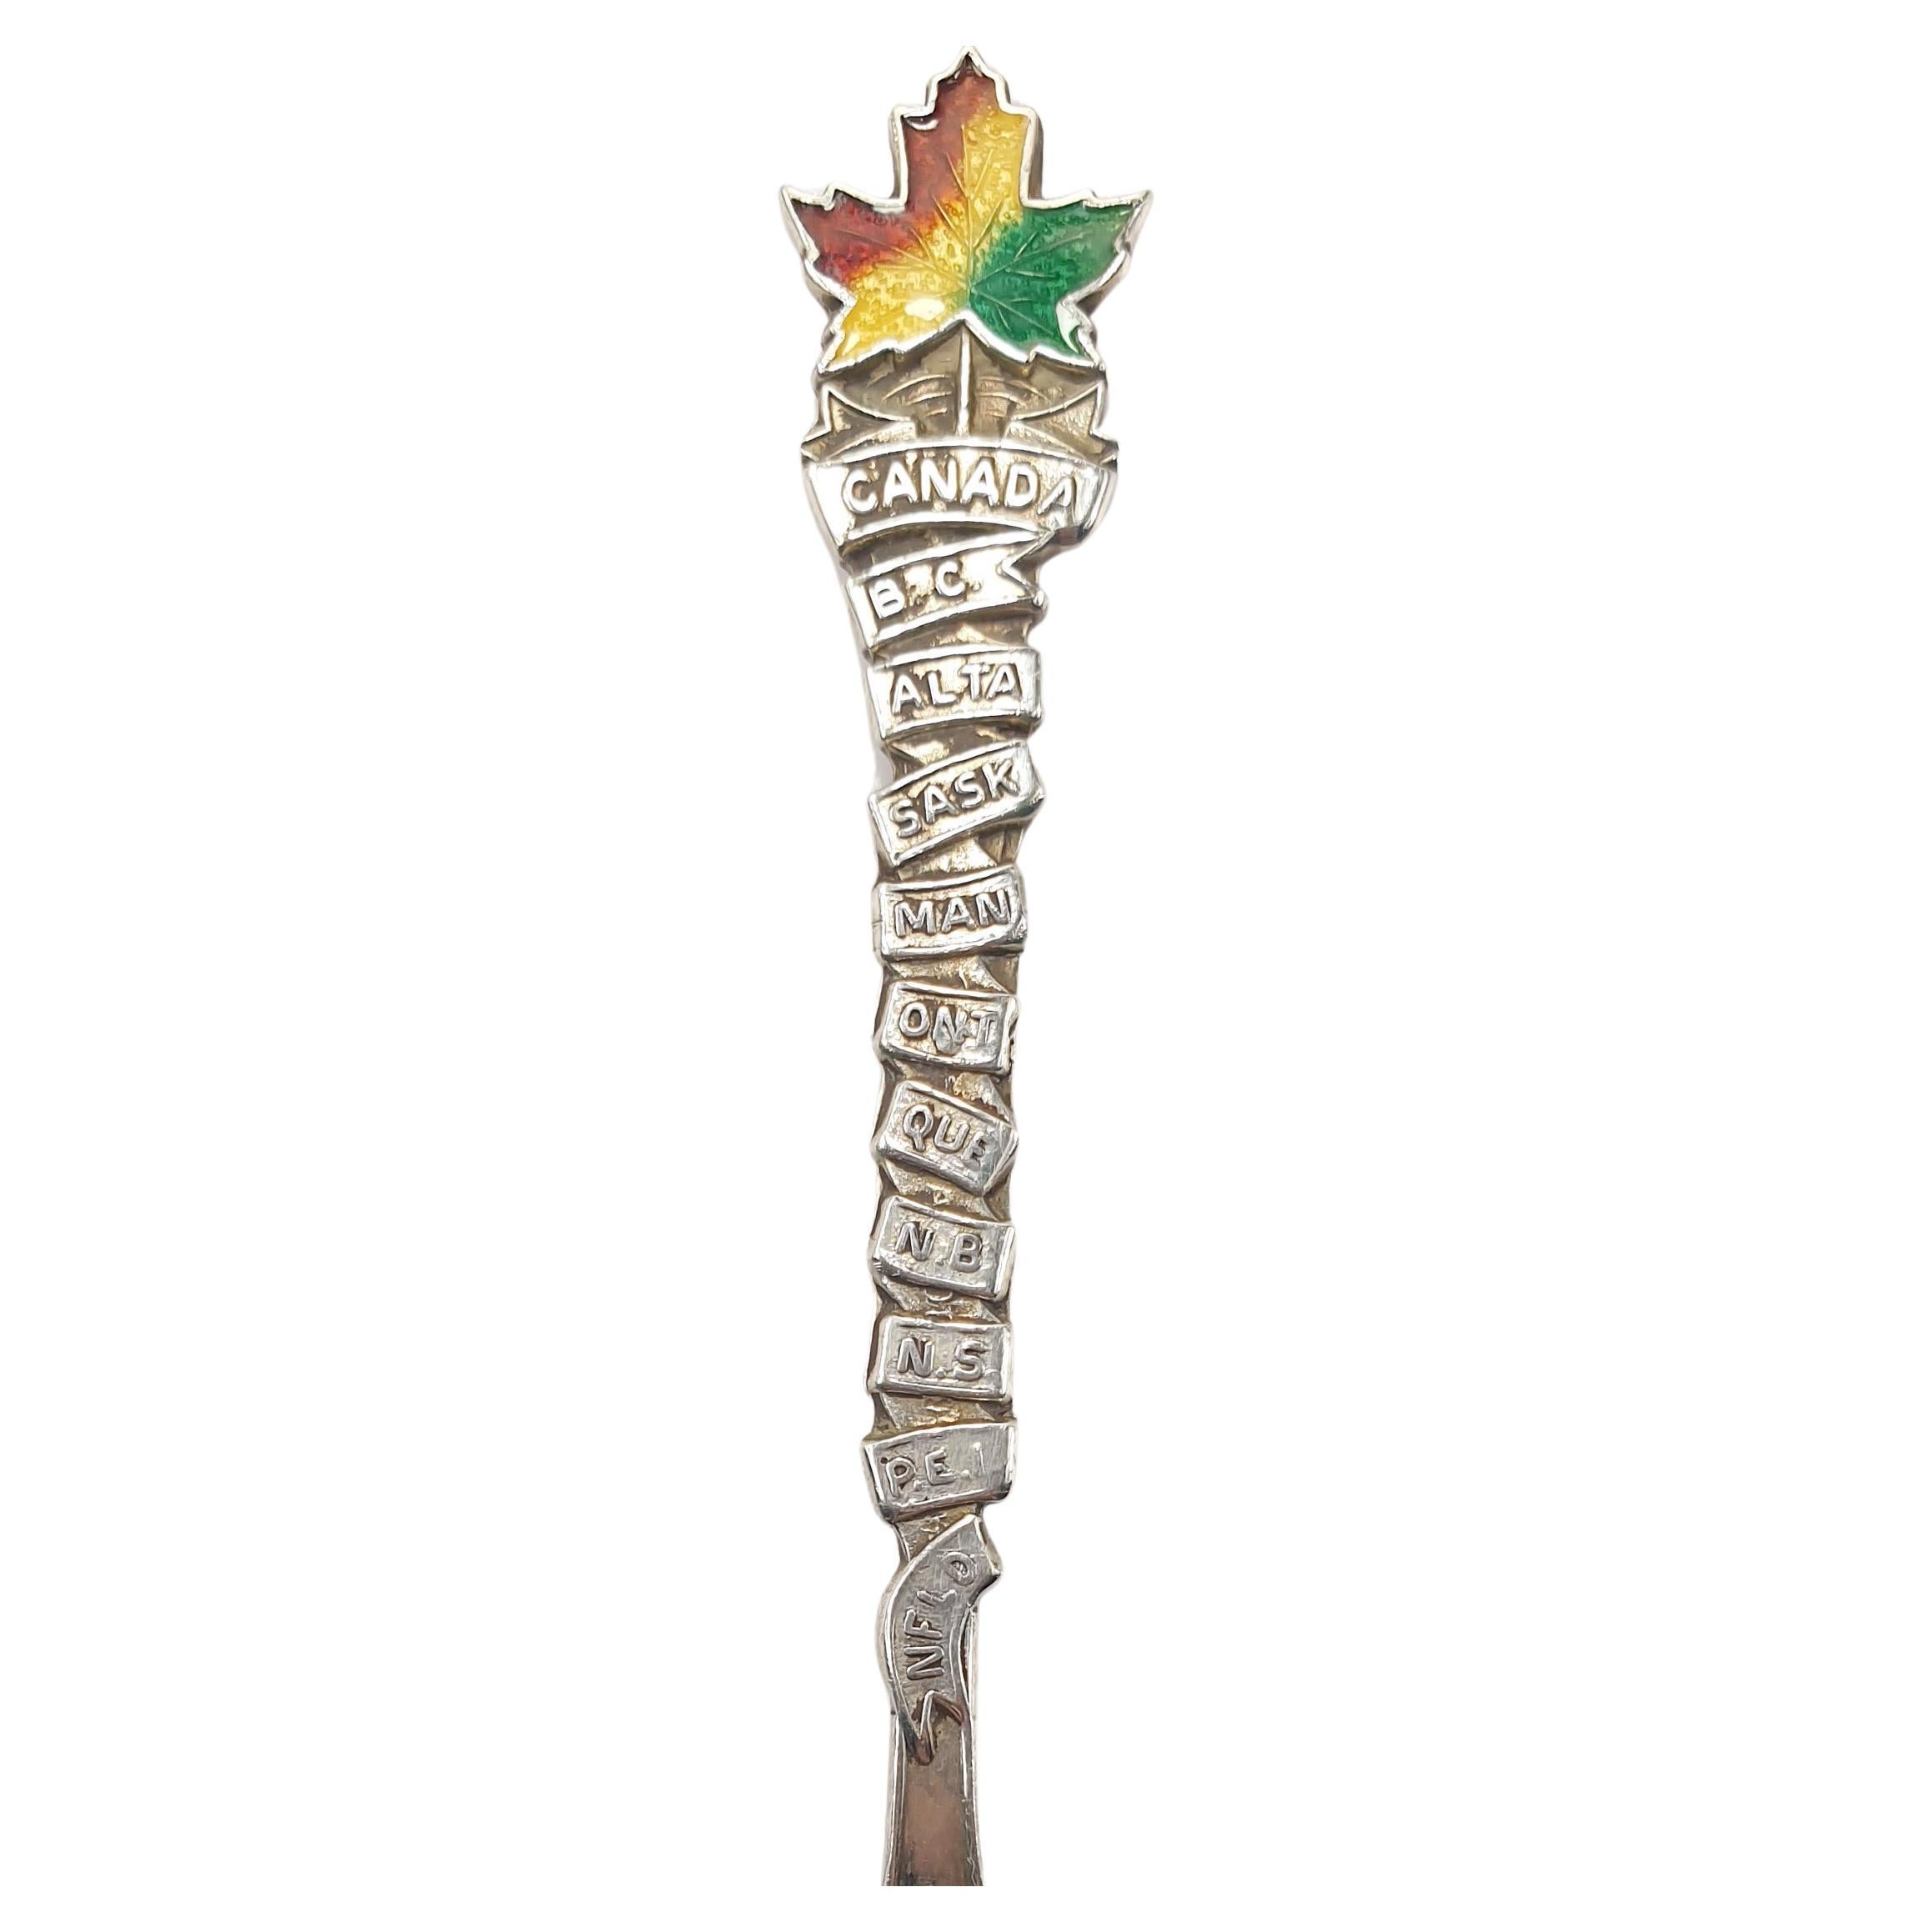 Contemporary Montreal Canada Maple Leaf Collection Silver Teaspoon with Figurine For Sale